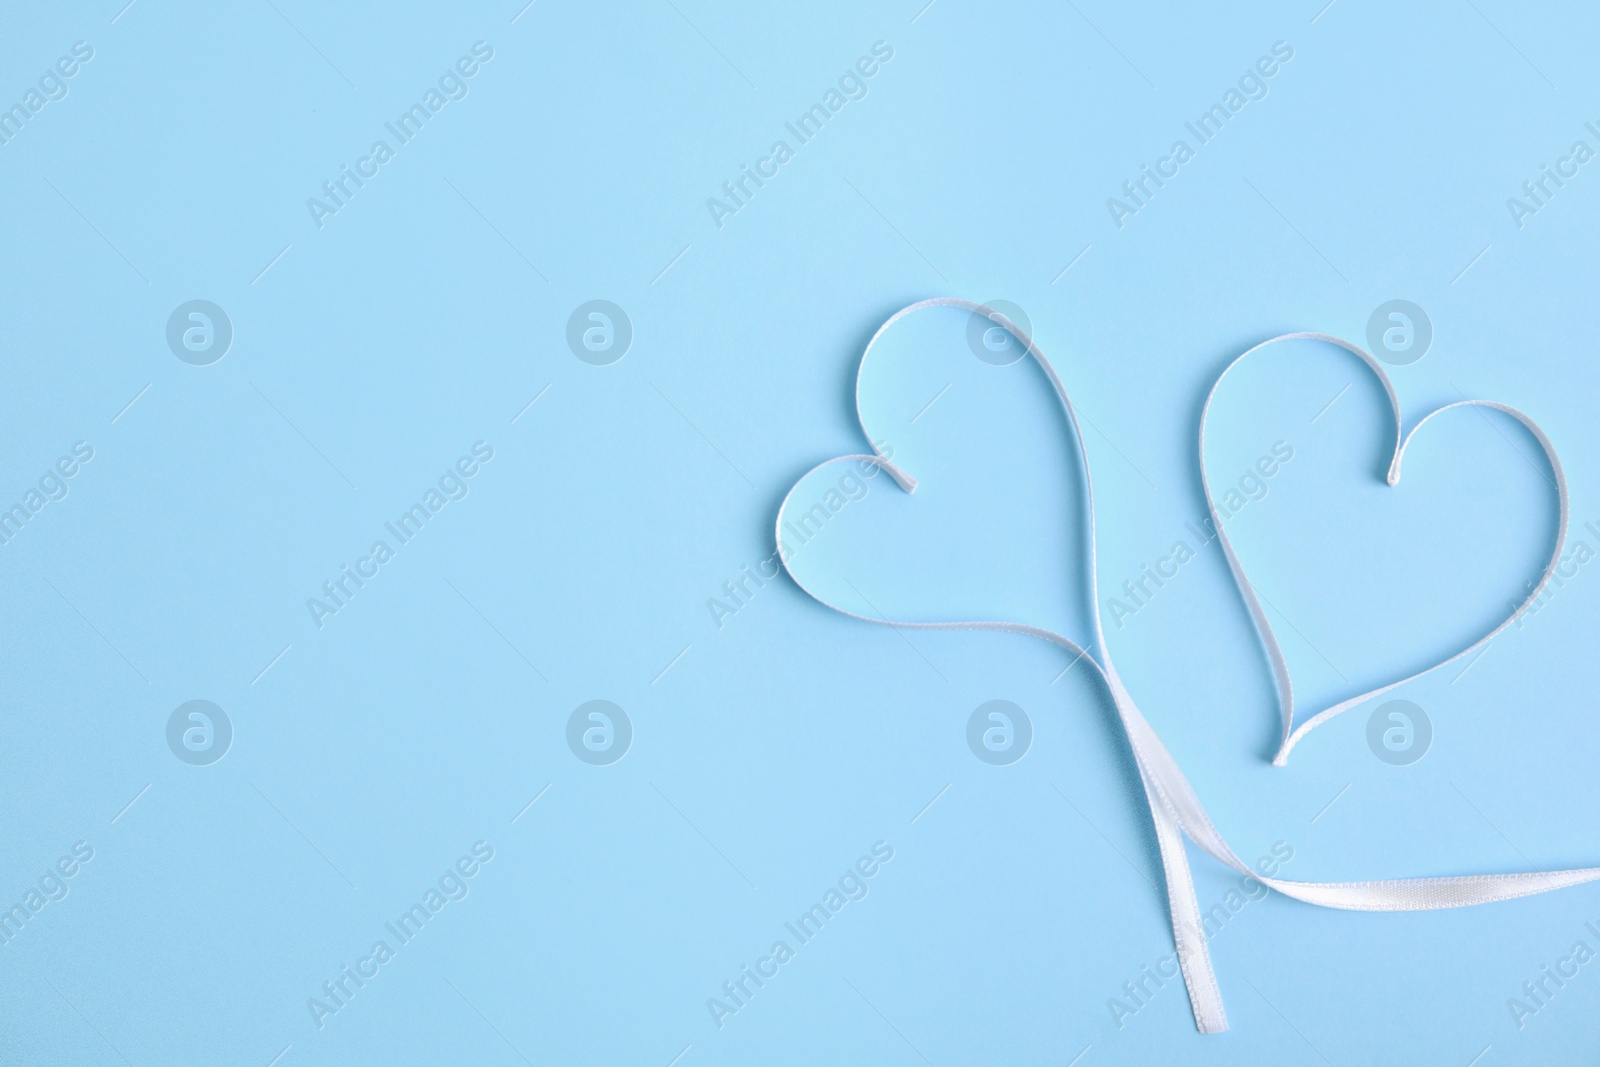 Photo of Hearts made of white ribbon on light blue background, flat lay with space for text. Valentine's day celebration